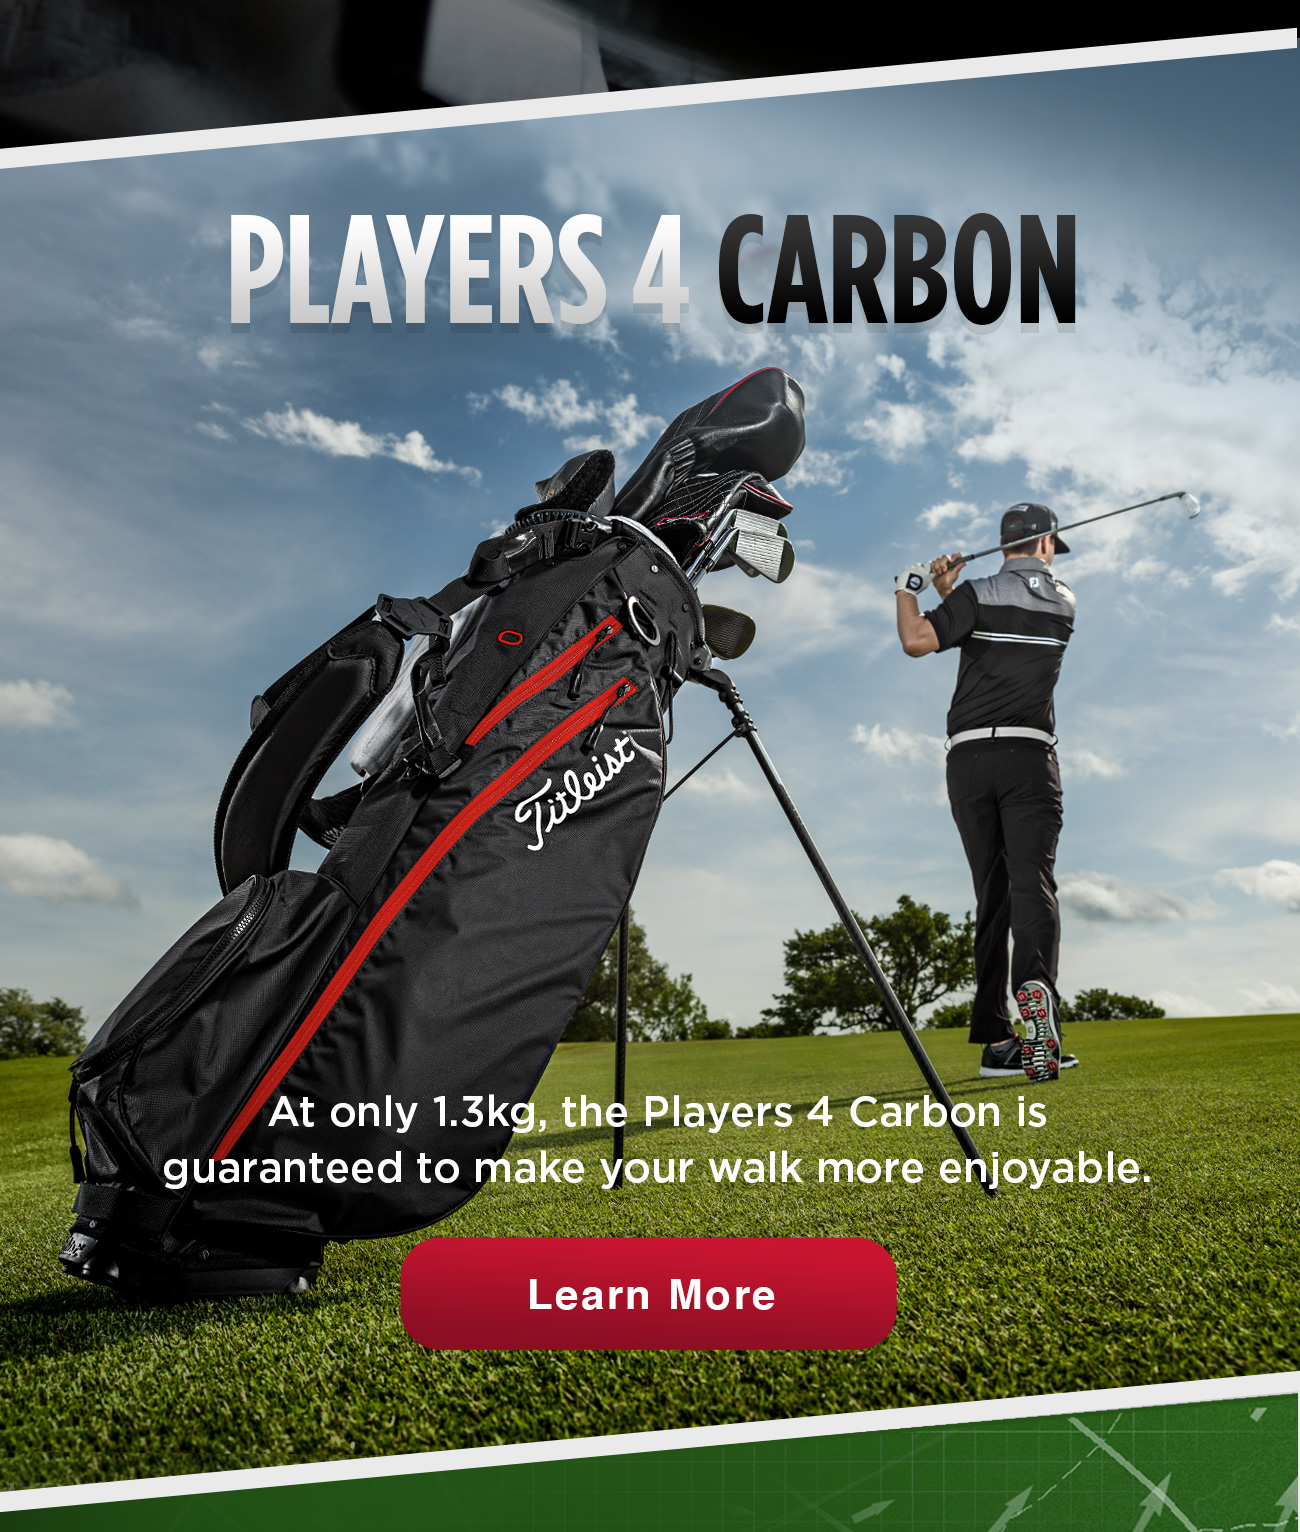 Players 4 Carbon